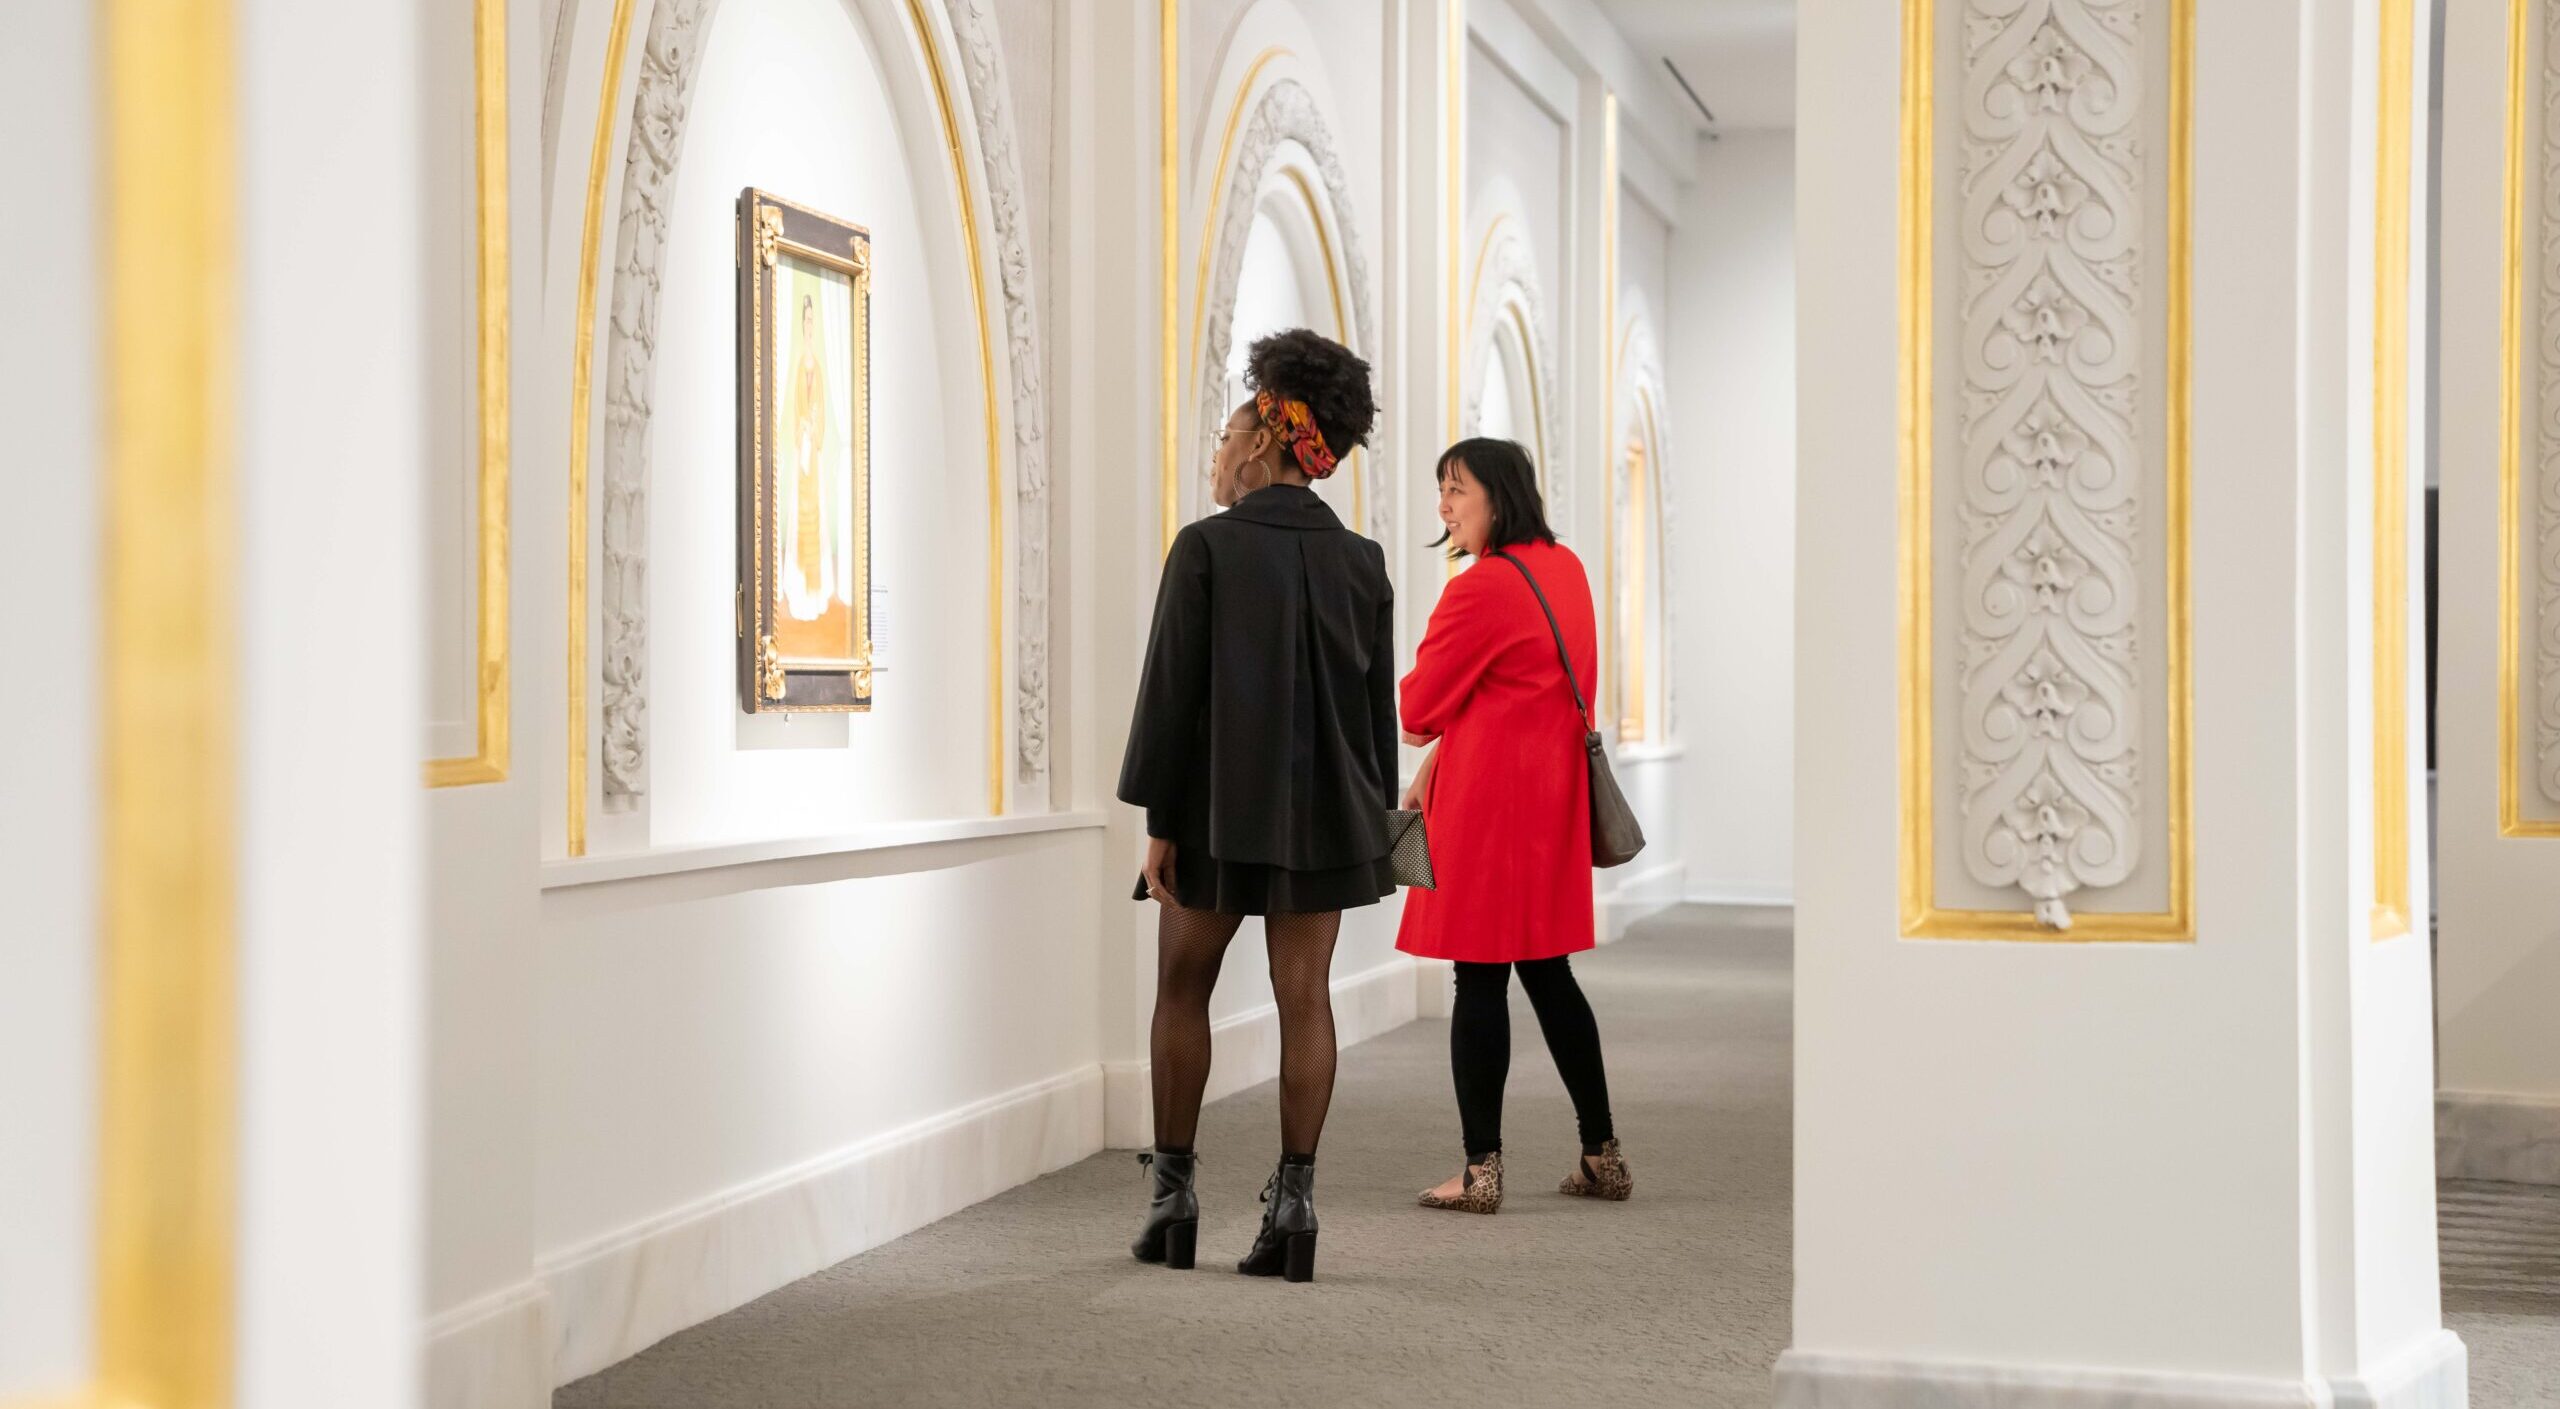 Two museum visitors observe artworks in a modern gallery.